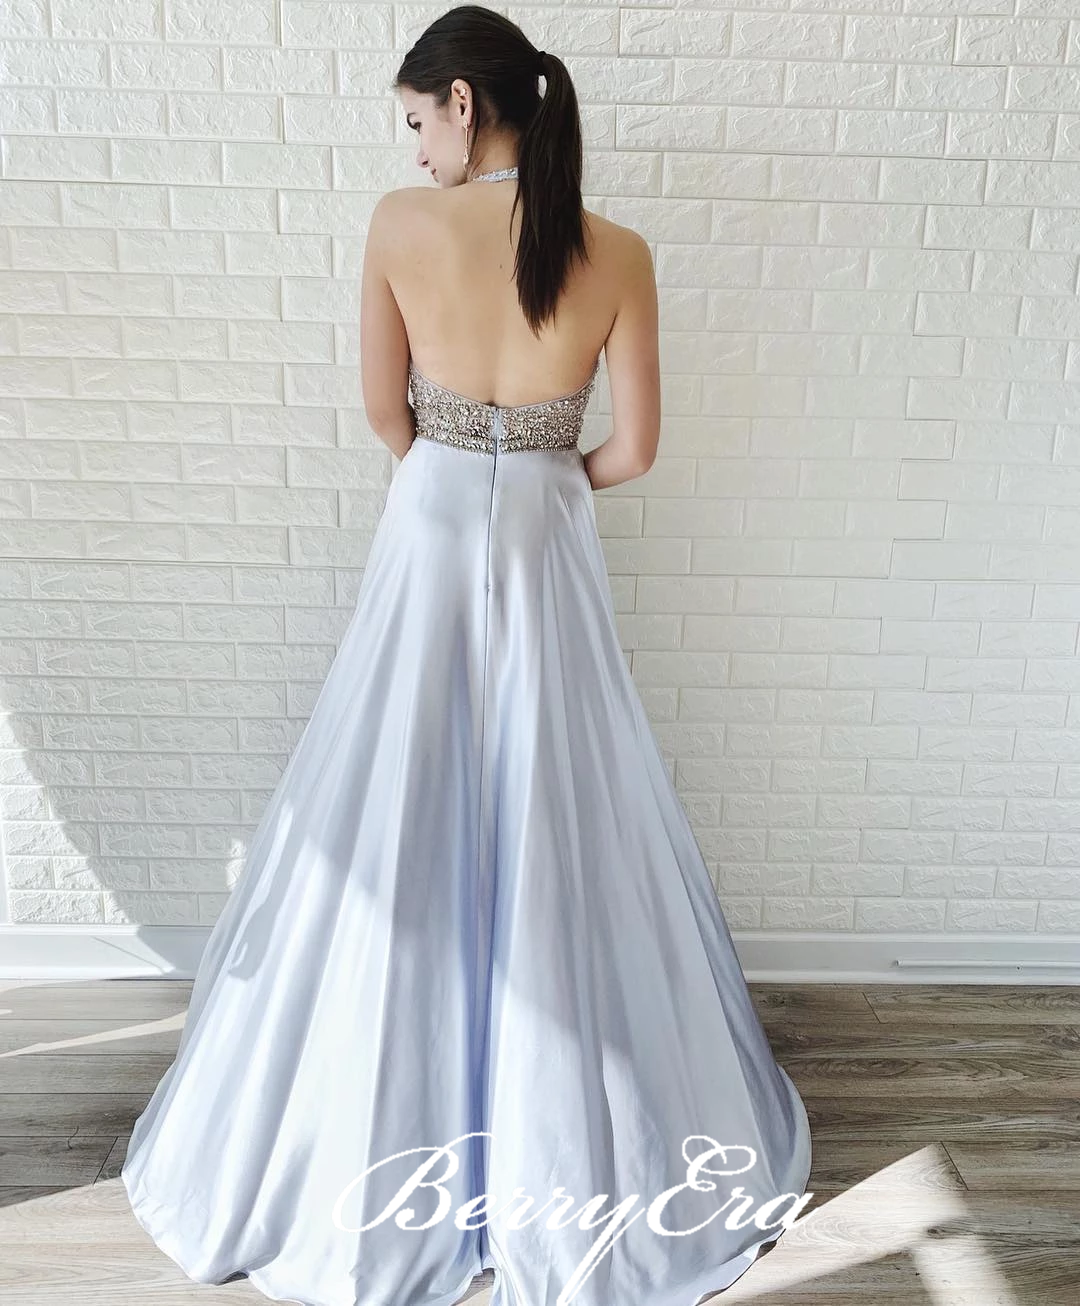 Halter Beaded Top A-line White Satin Prom Dresses, Backless Long Prom Dresses, Newest Prom Dresses